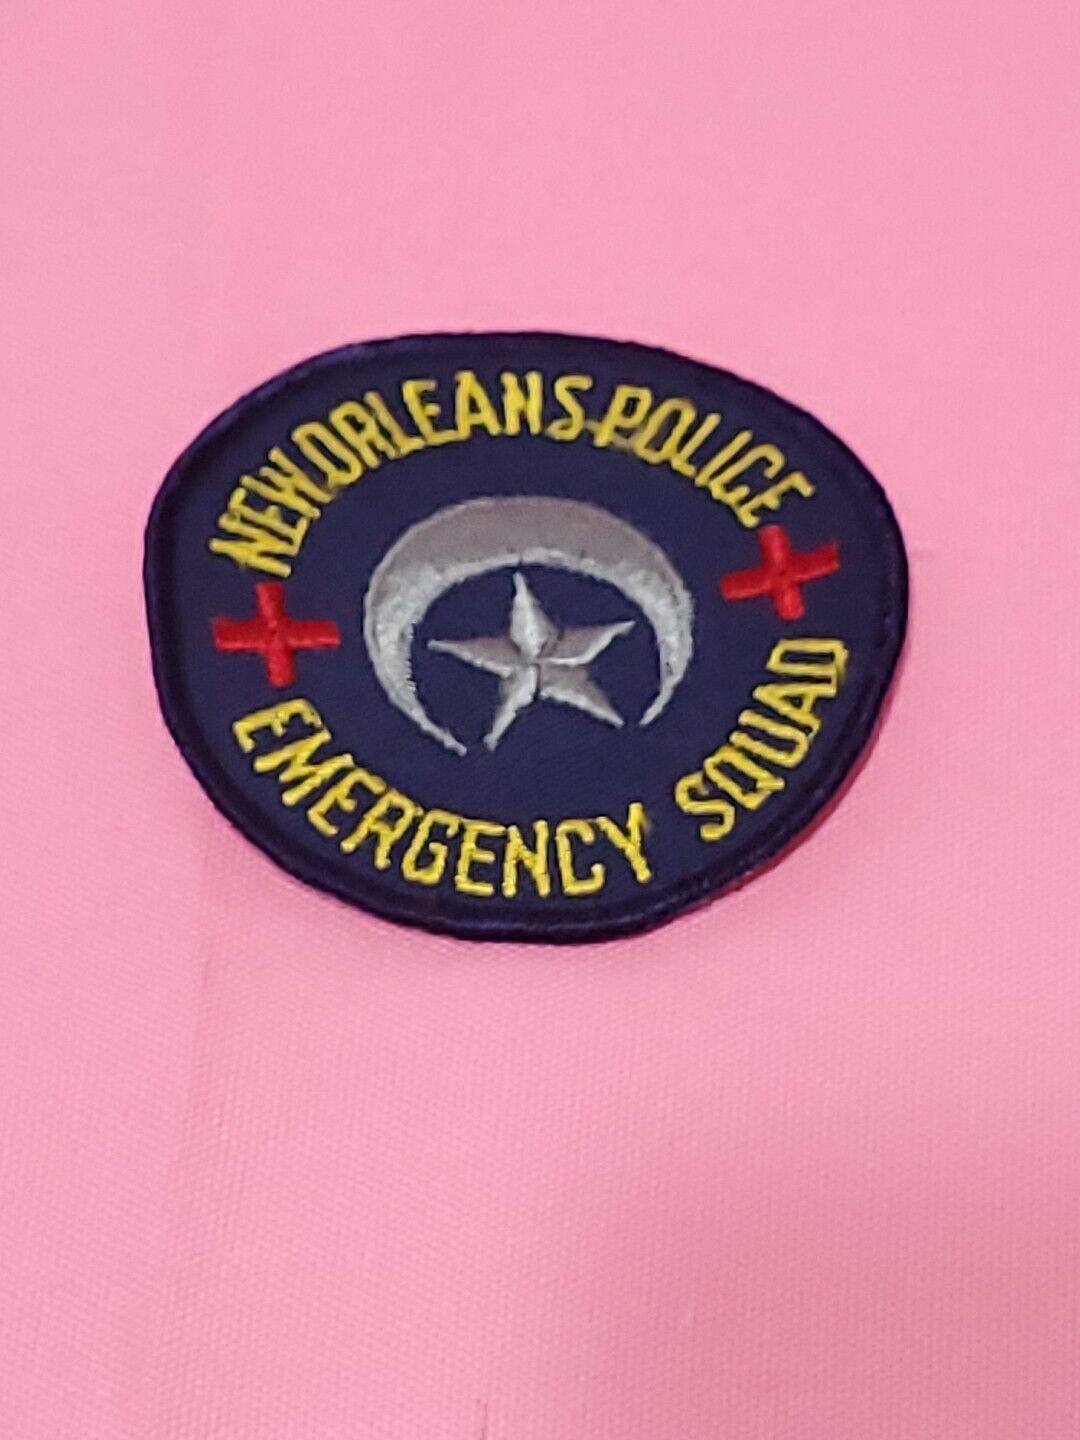 Vintage New Orleans Police Emergency Squad Patch